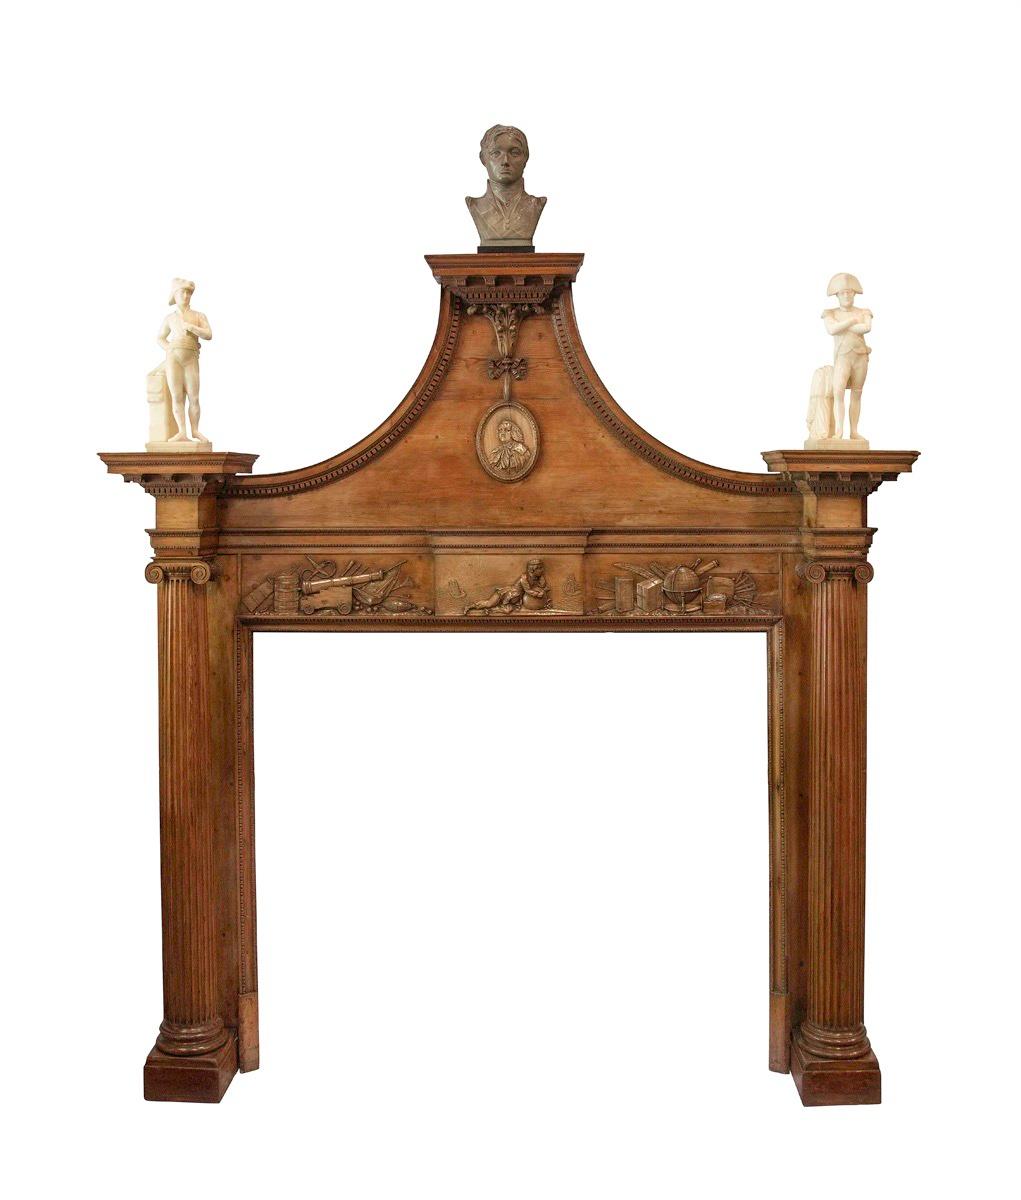 This pine chimneypiece has a swan-neck pediment supporting three pedestals, with dentil and leaf borders.  There is a central limewood oval portrait of Robert Marsham, 2nd Baron Romney carved in relief and suspended by acanthus and tied ribbons. 